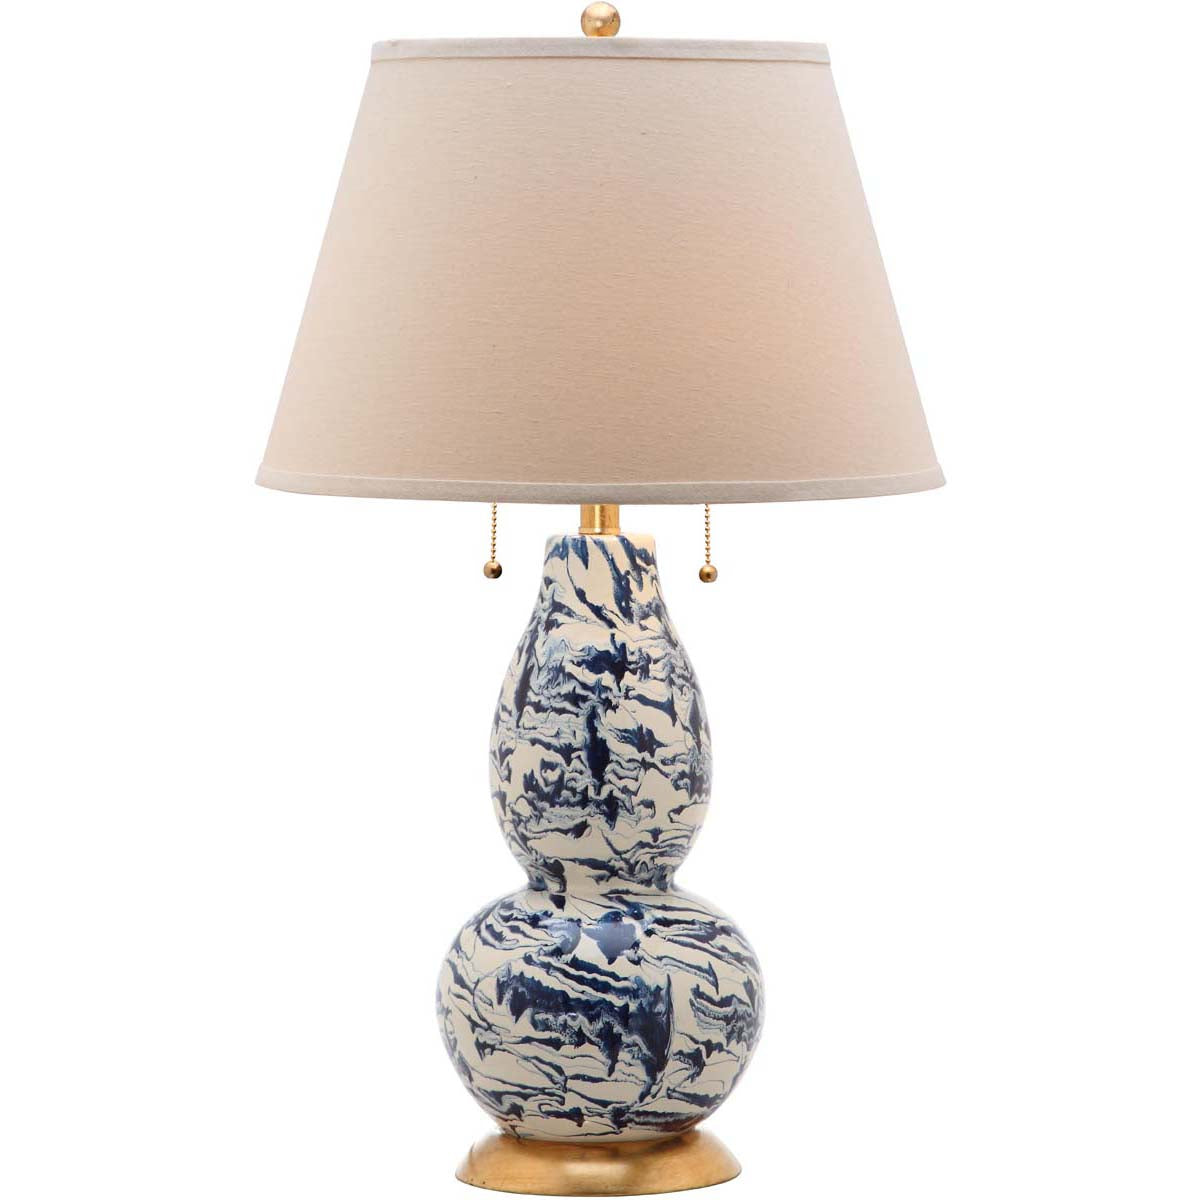 Safavieh Color Swirls  28 Inch H Glass Table Lamp , LITS4159 - Navy / White